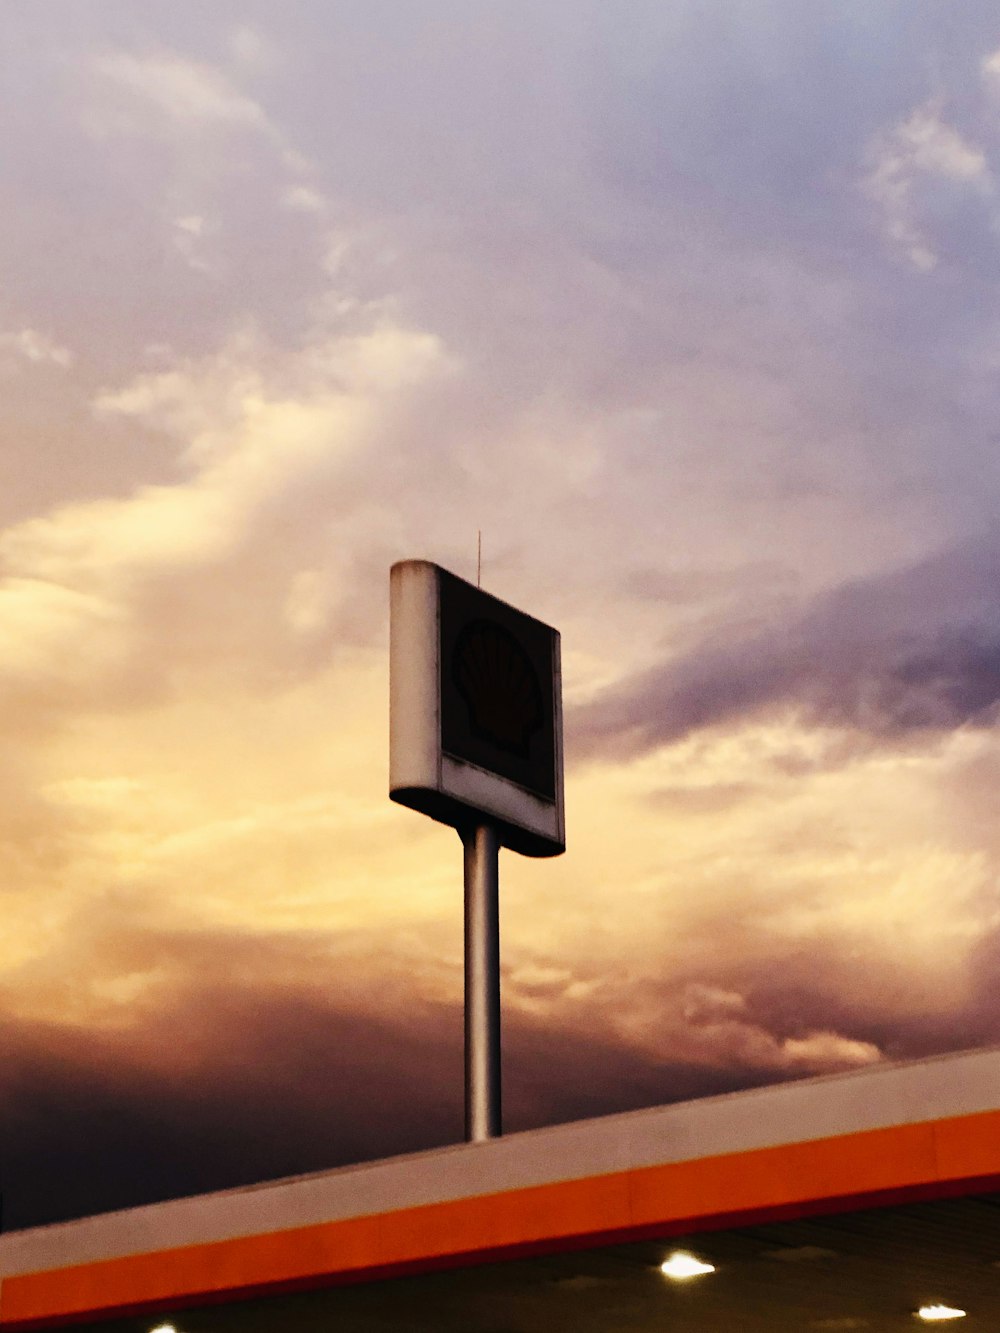 a street sign on a pole in front of a cloudy sky